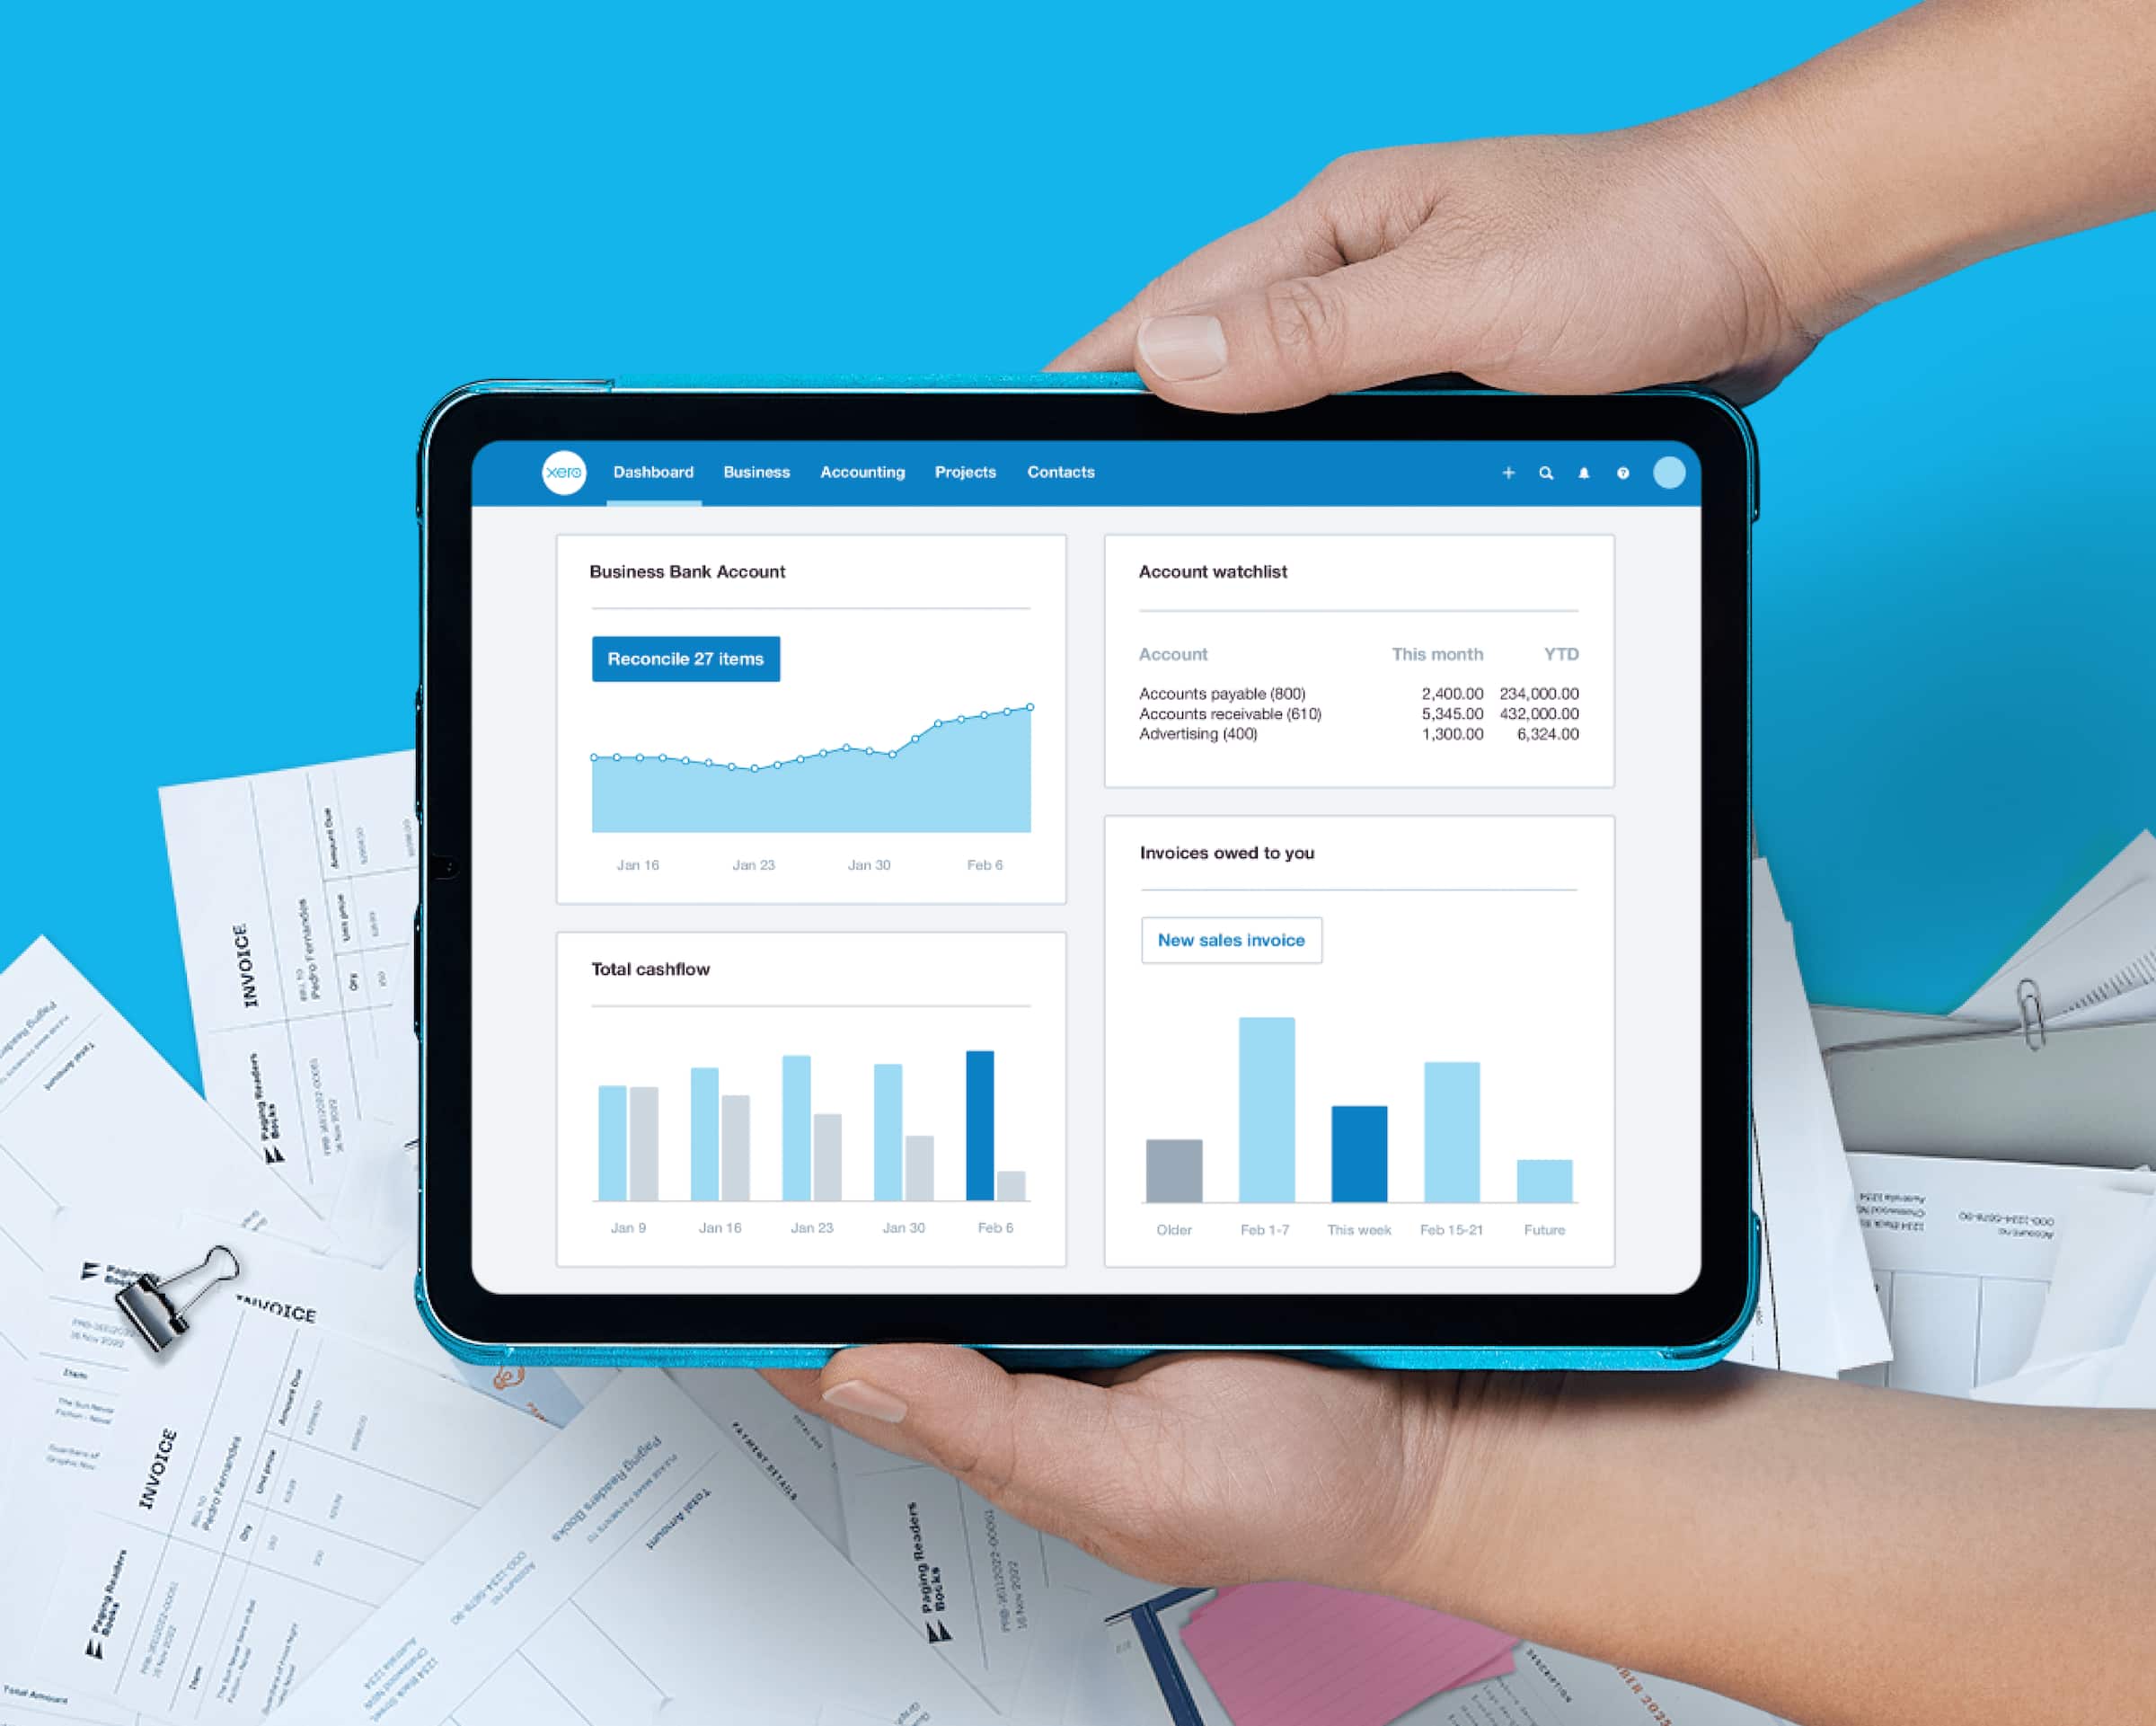 The Xero dashboard open on an iPad and held above scattered paper documents.